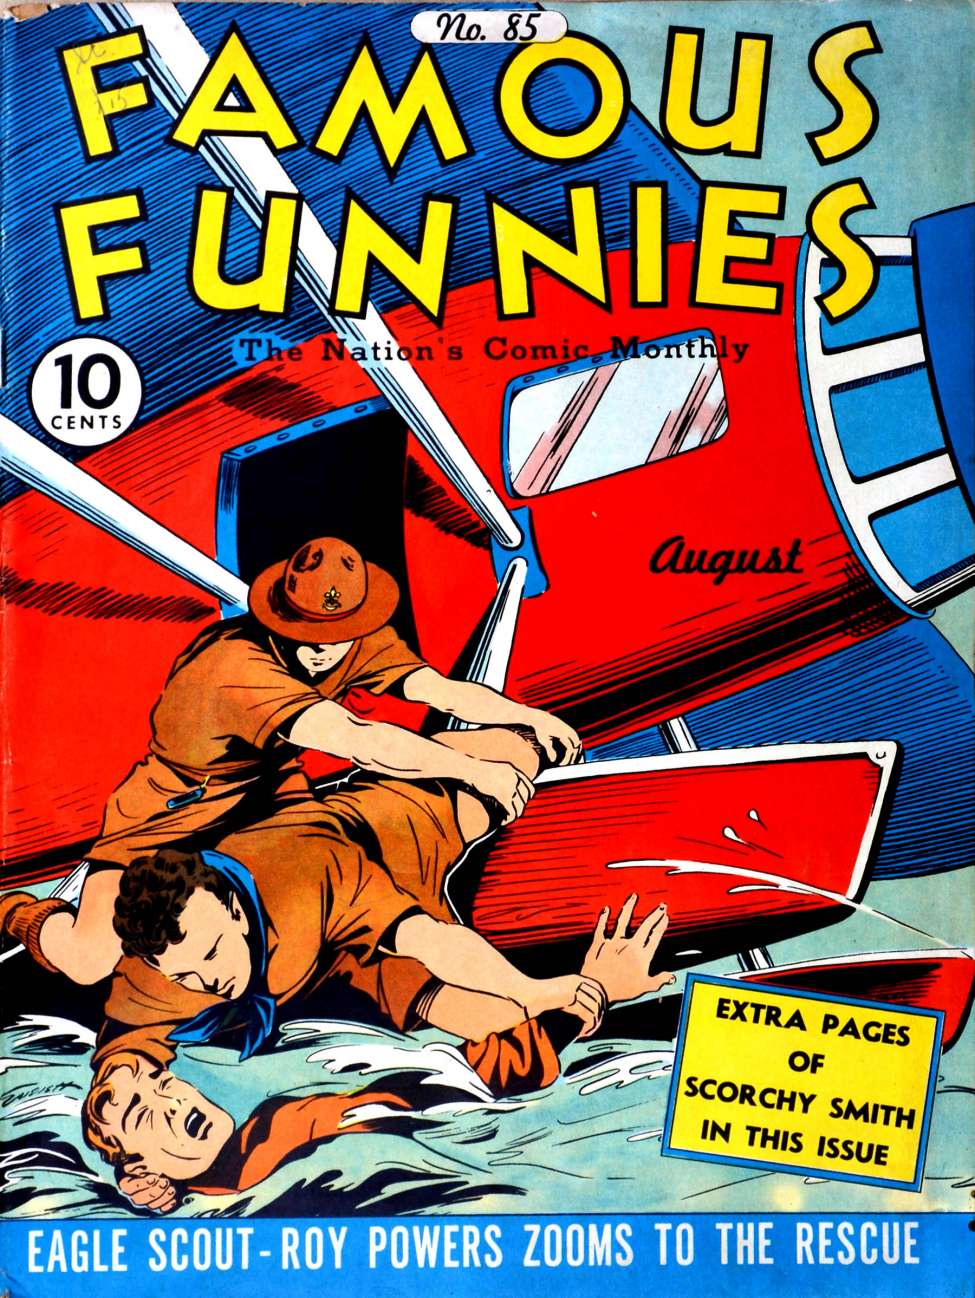 Book Cover For Famous Funnies 85 - Version 1